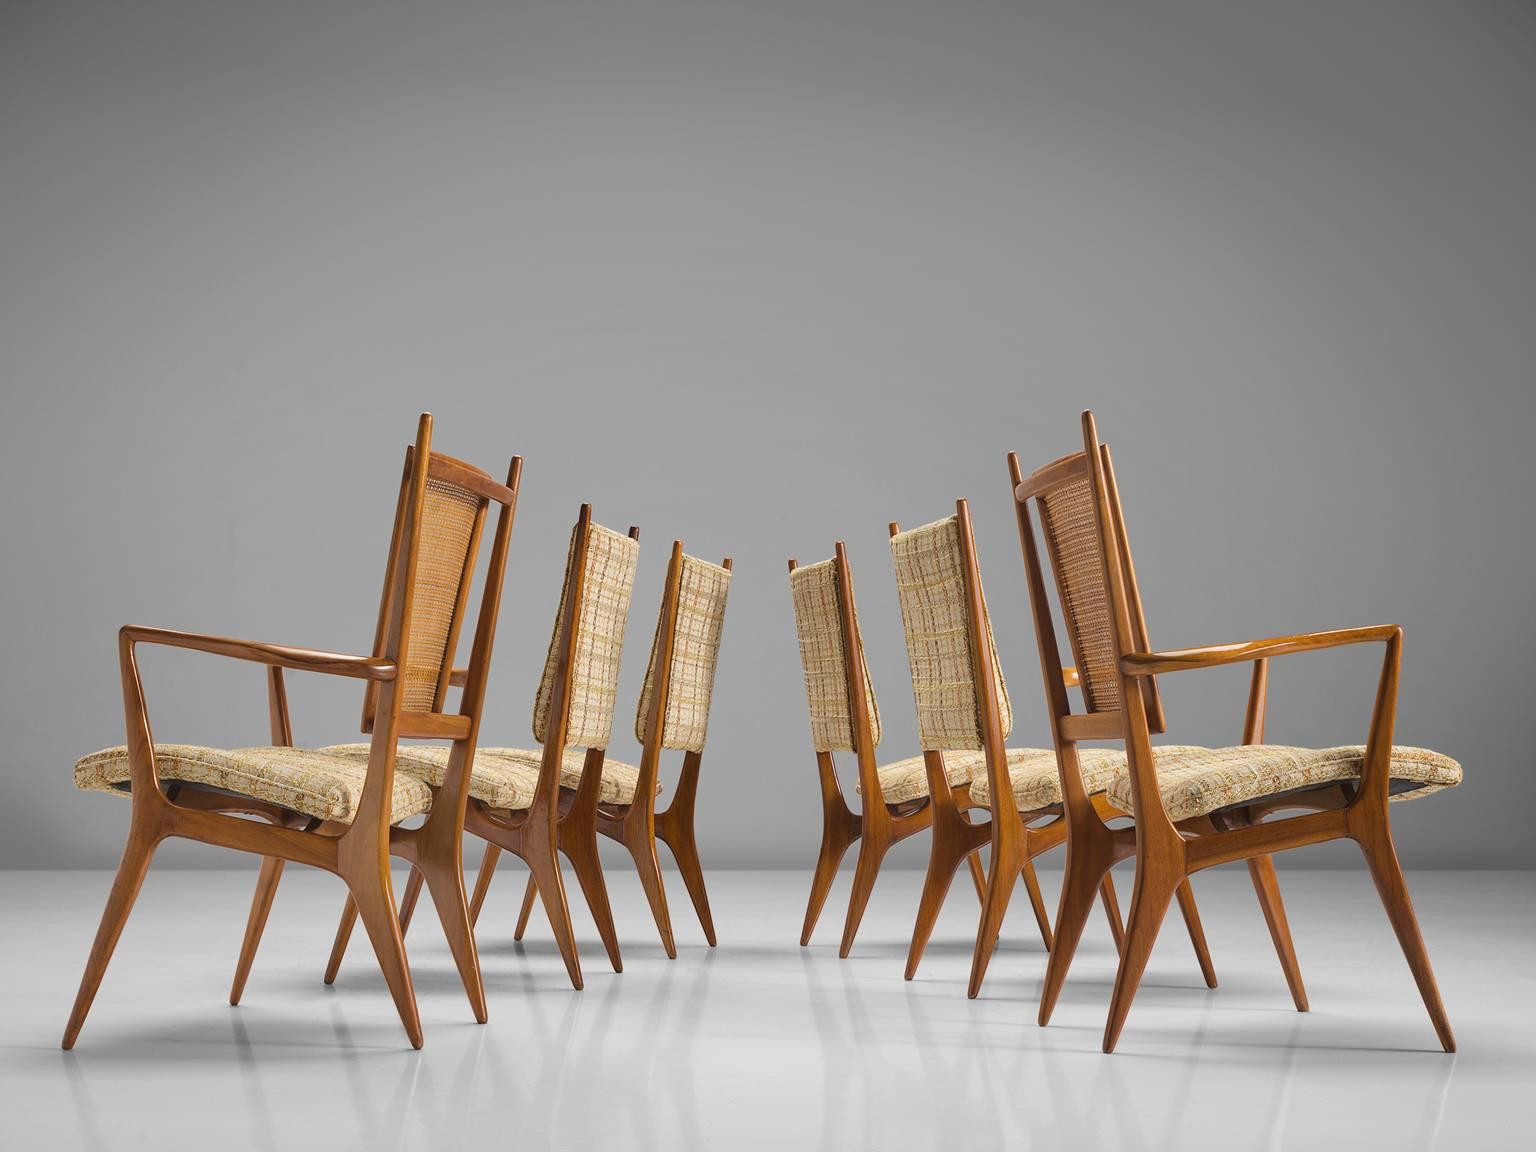 Vladimir Kagan, set of six chairs of which two with armrests, walnut, cane, fabric, United States, circa 1955.

This set of dining chairs is designed by Vladimir Kagan for Hugo Dreyfuss. The set of six chairs is sensuous, sculptural and elegant.